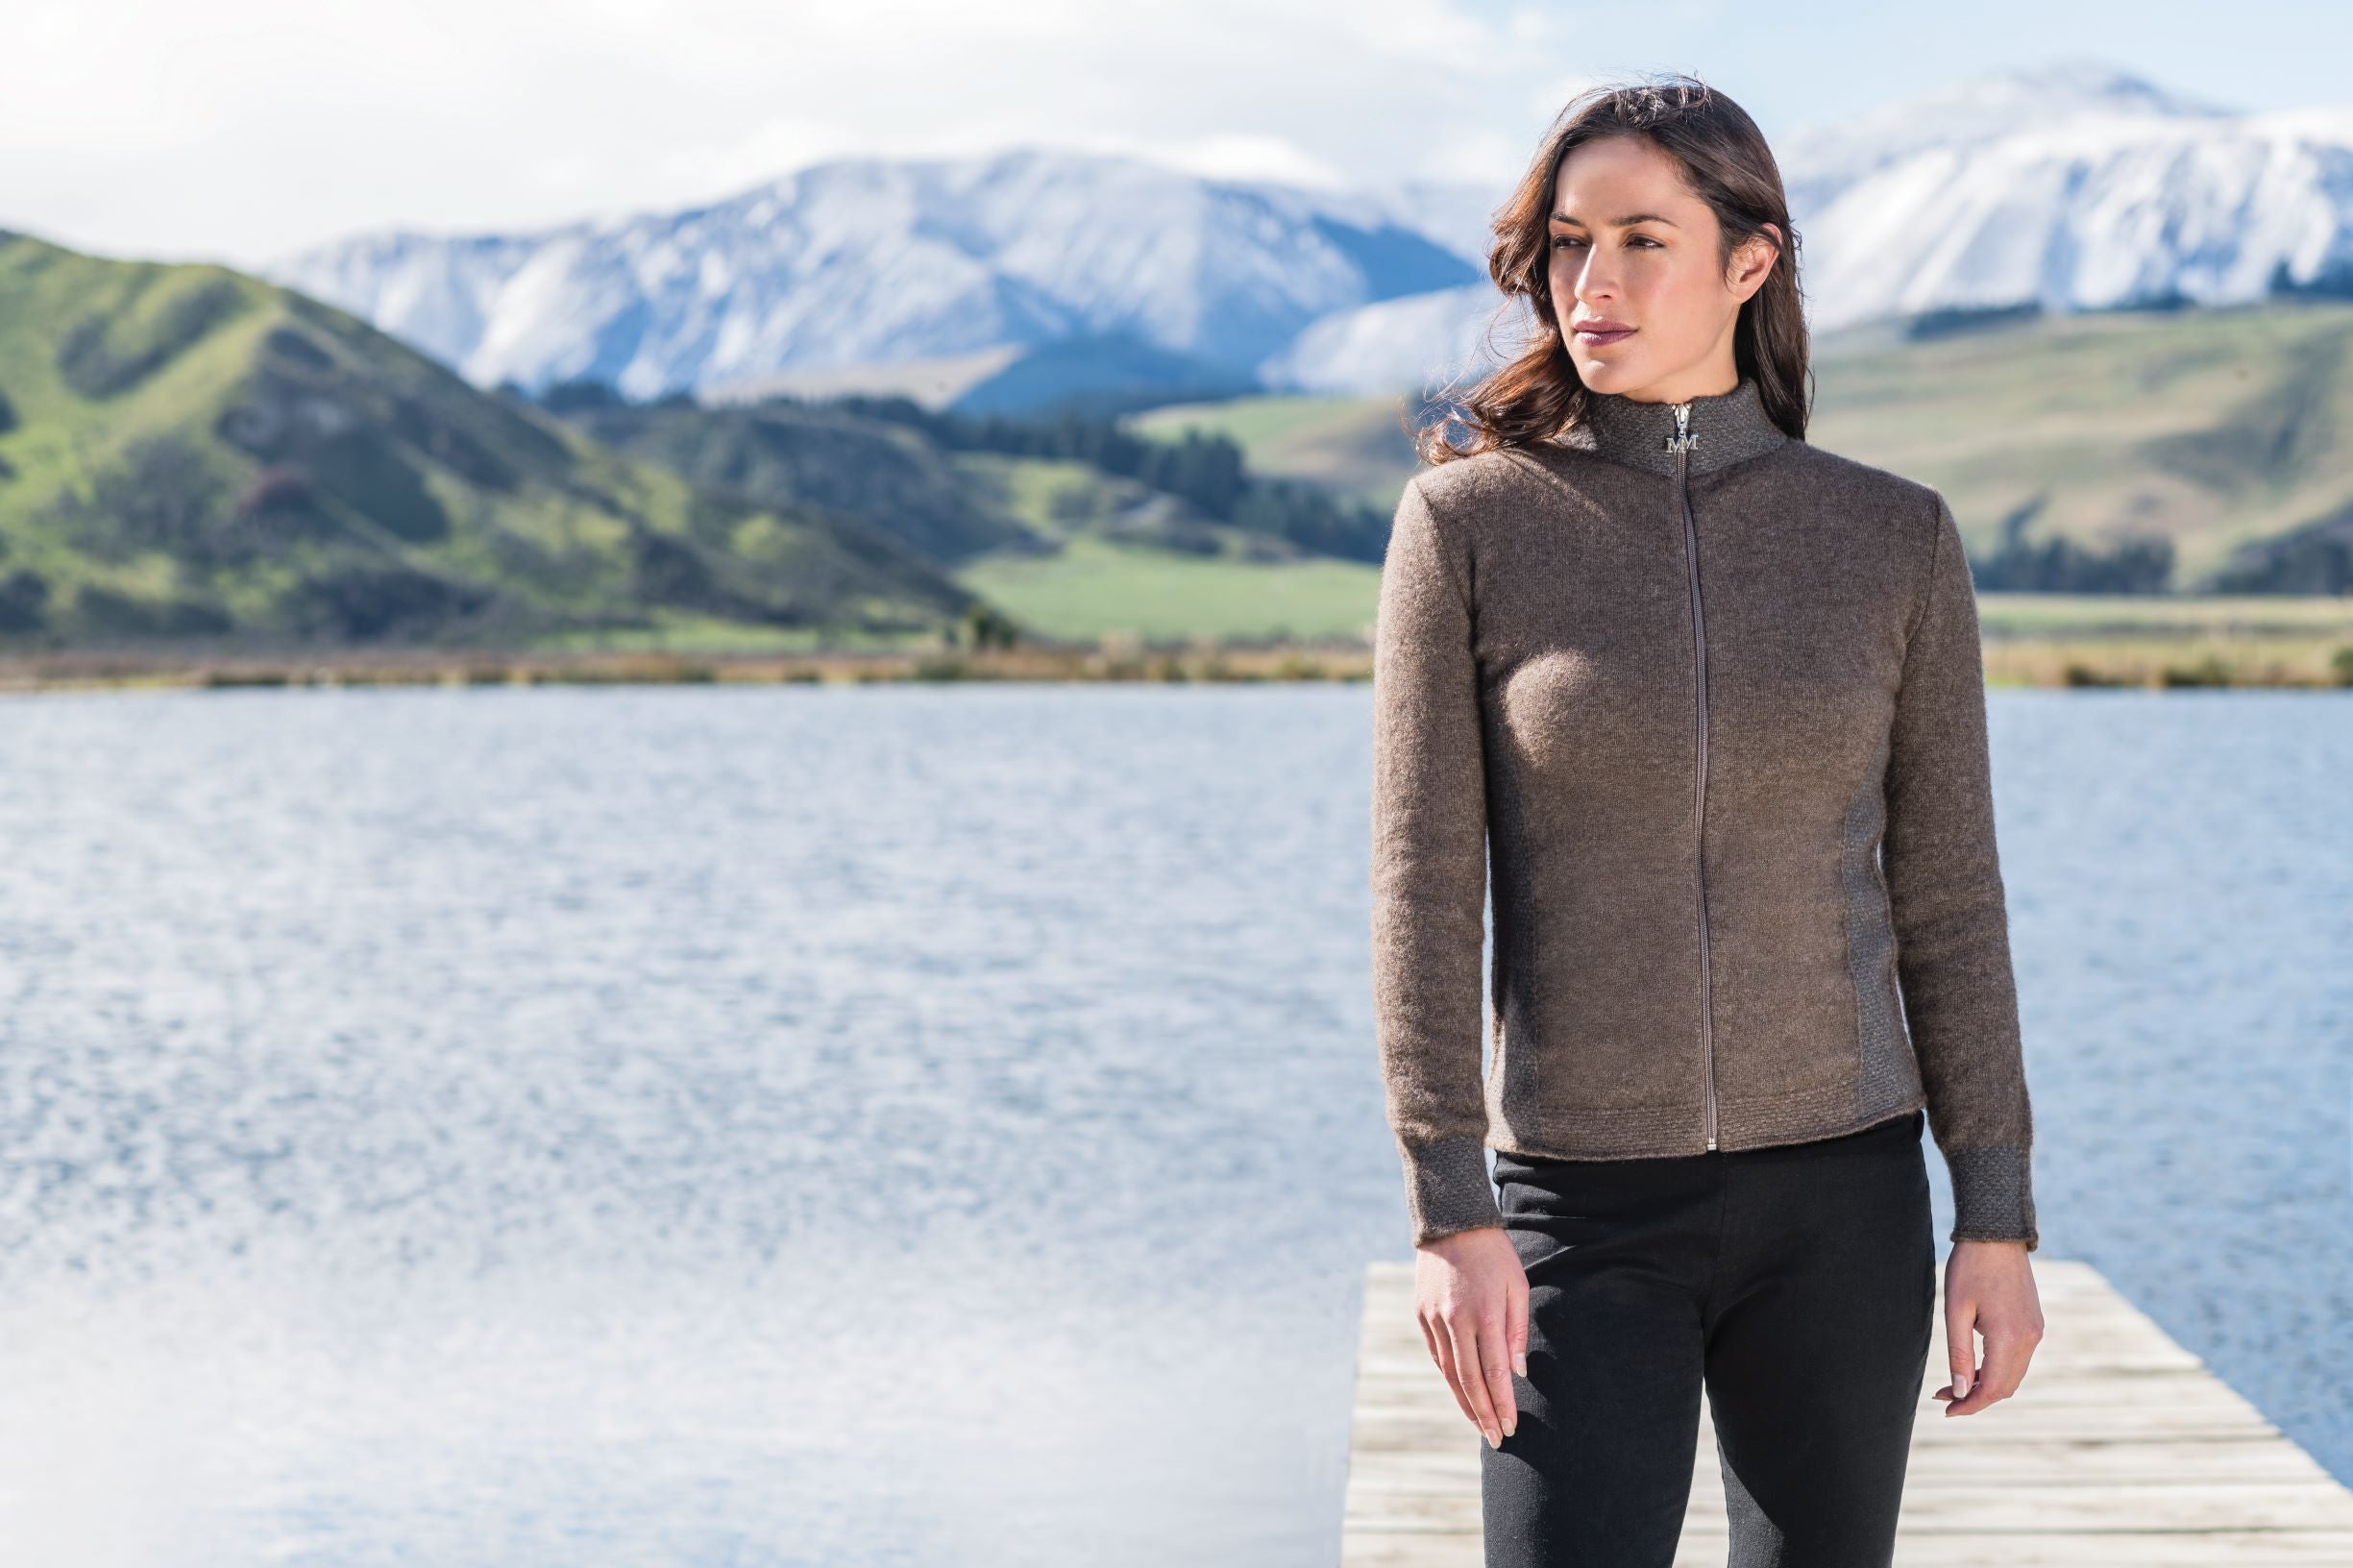 possum merino jacket made in New Zealand in front of a lake and stunning mountains